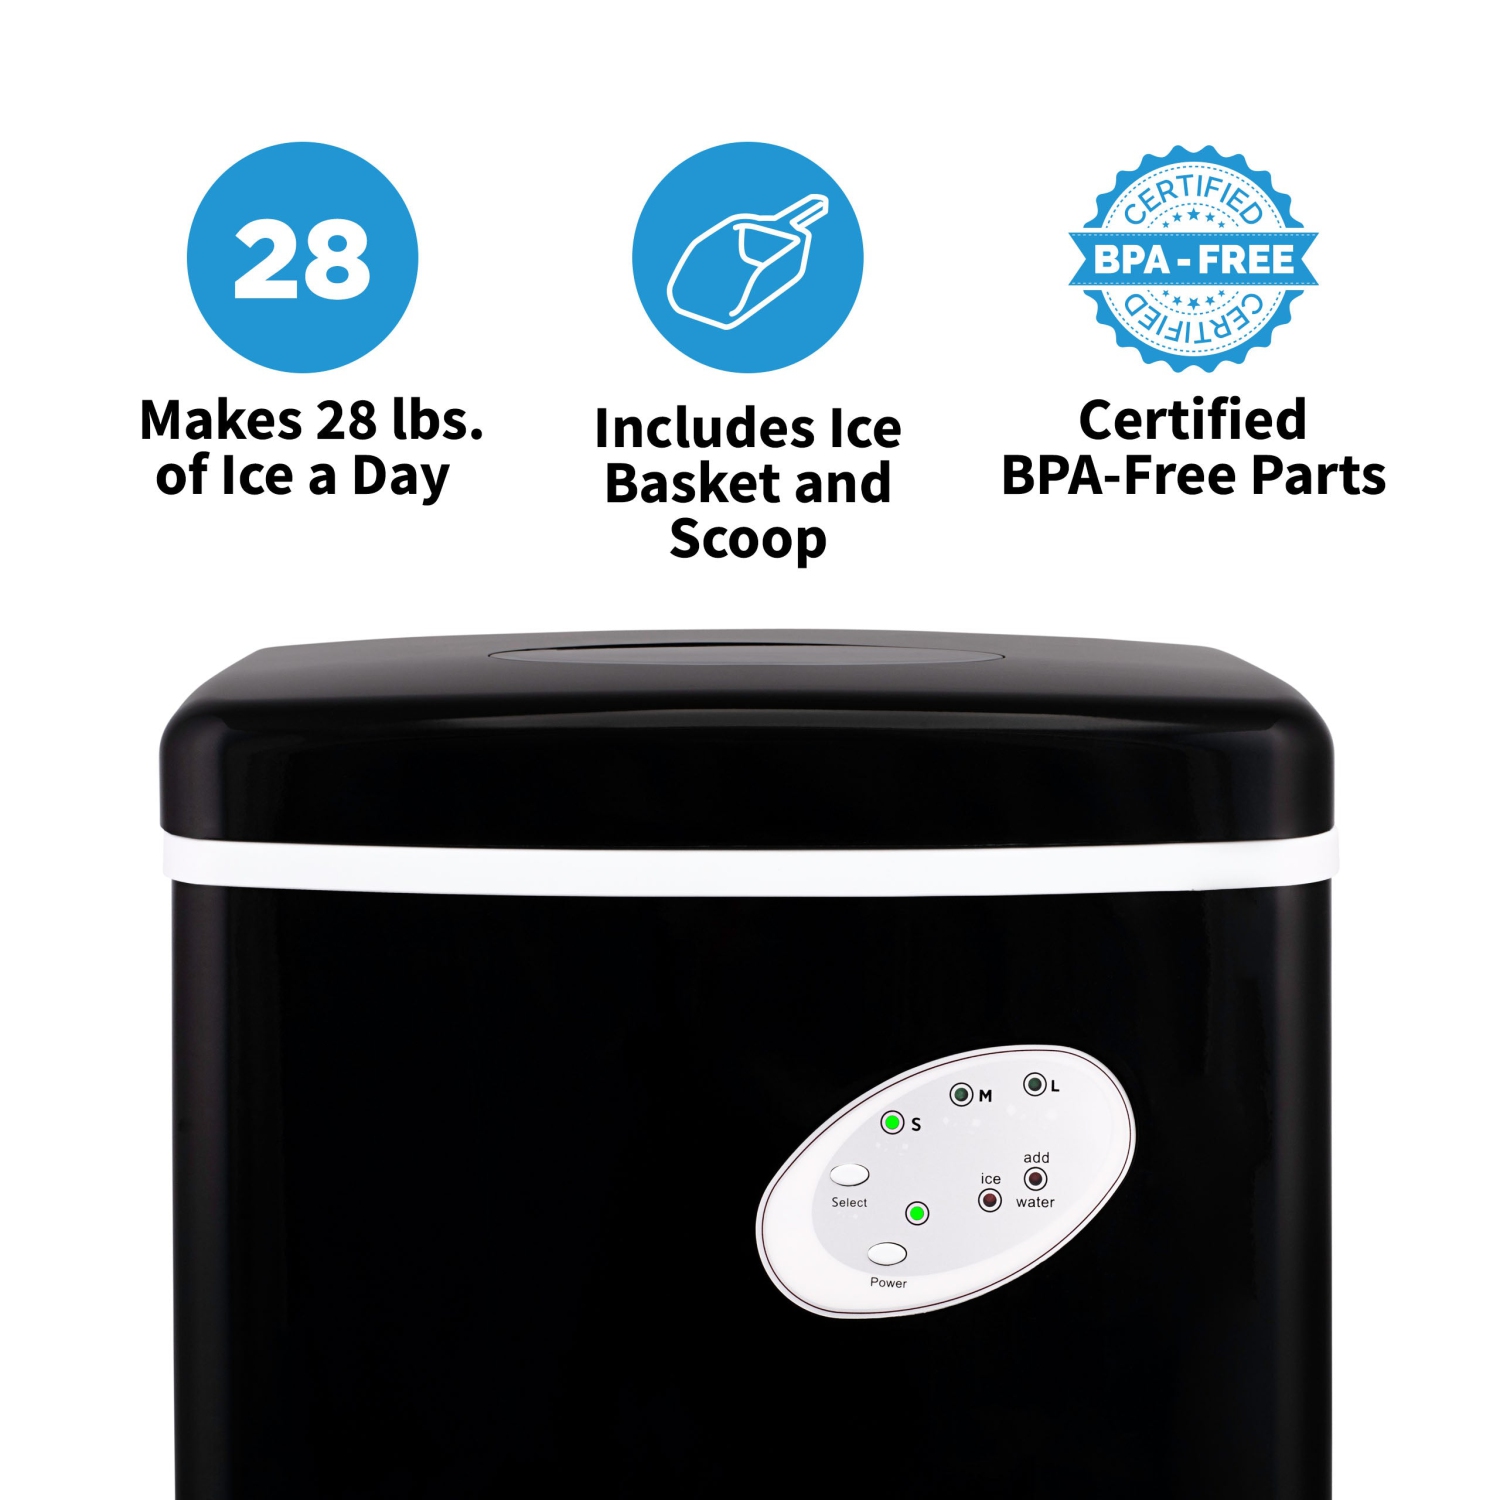 NewAir Countertop Ice Maker, 28 lbs. of Ice a Day, 3 Ice Sizes